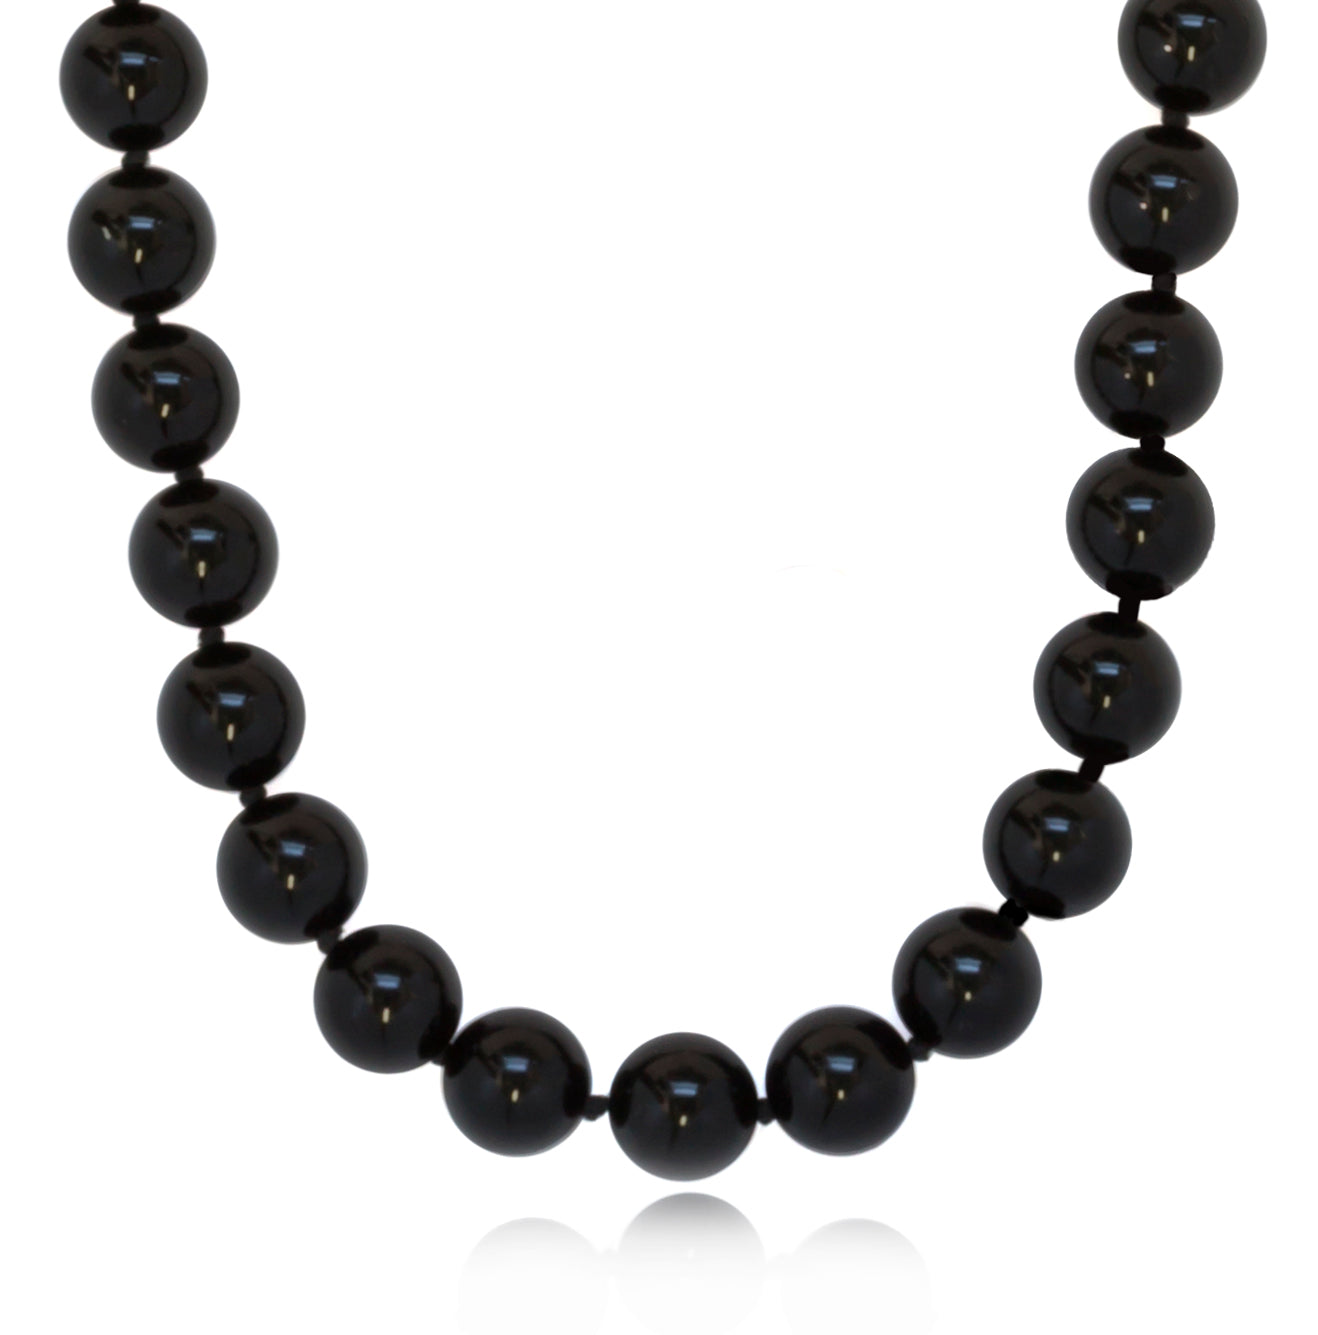 8mm Black Onyx Necklace with 925 Sterling Silver Clasp